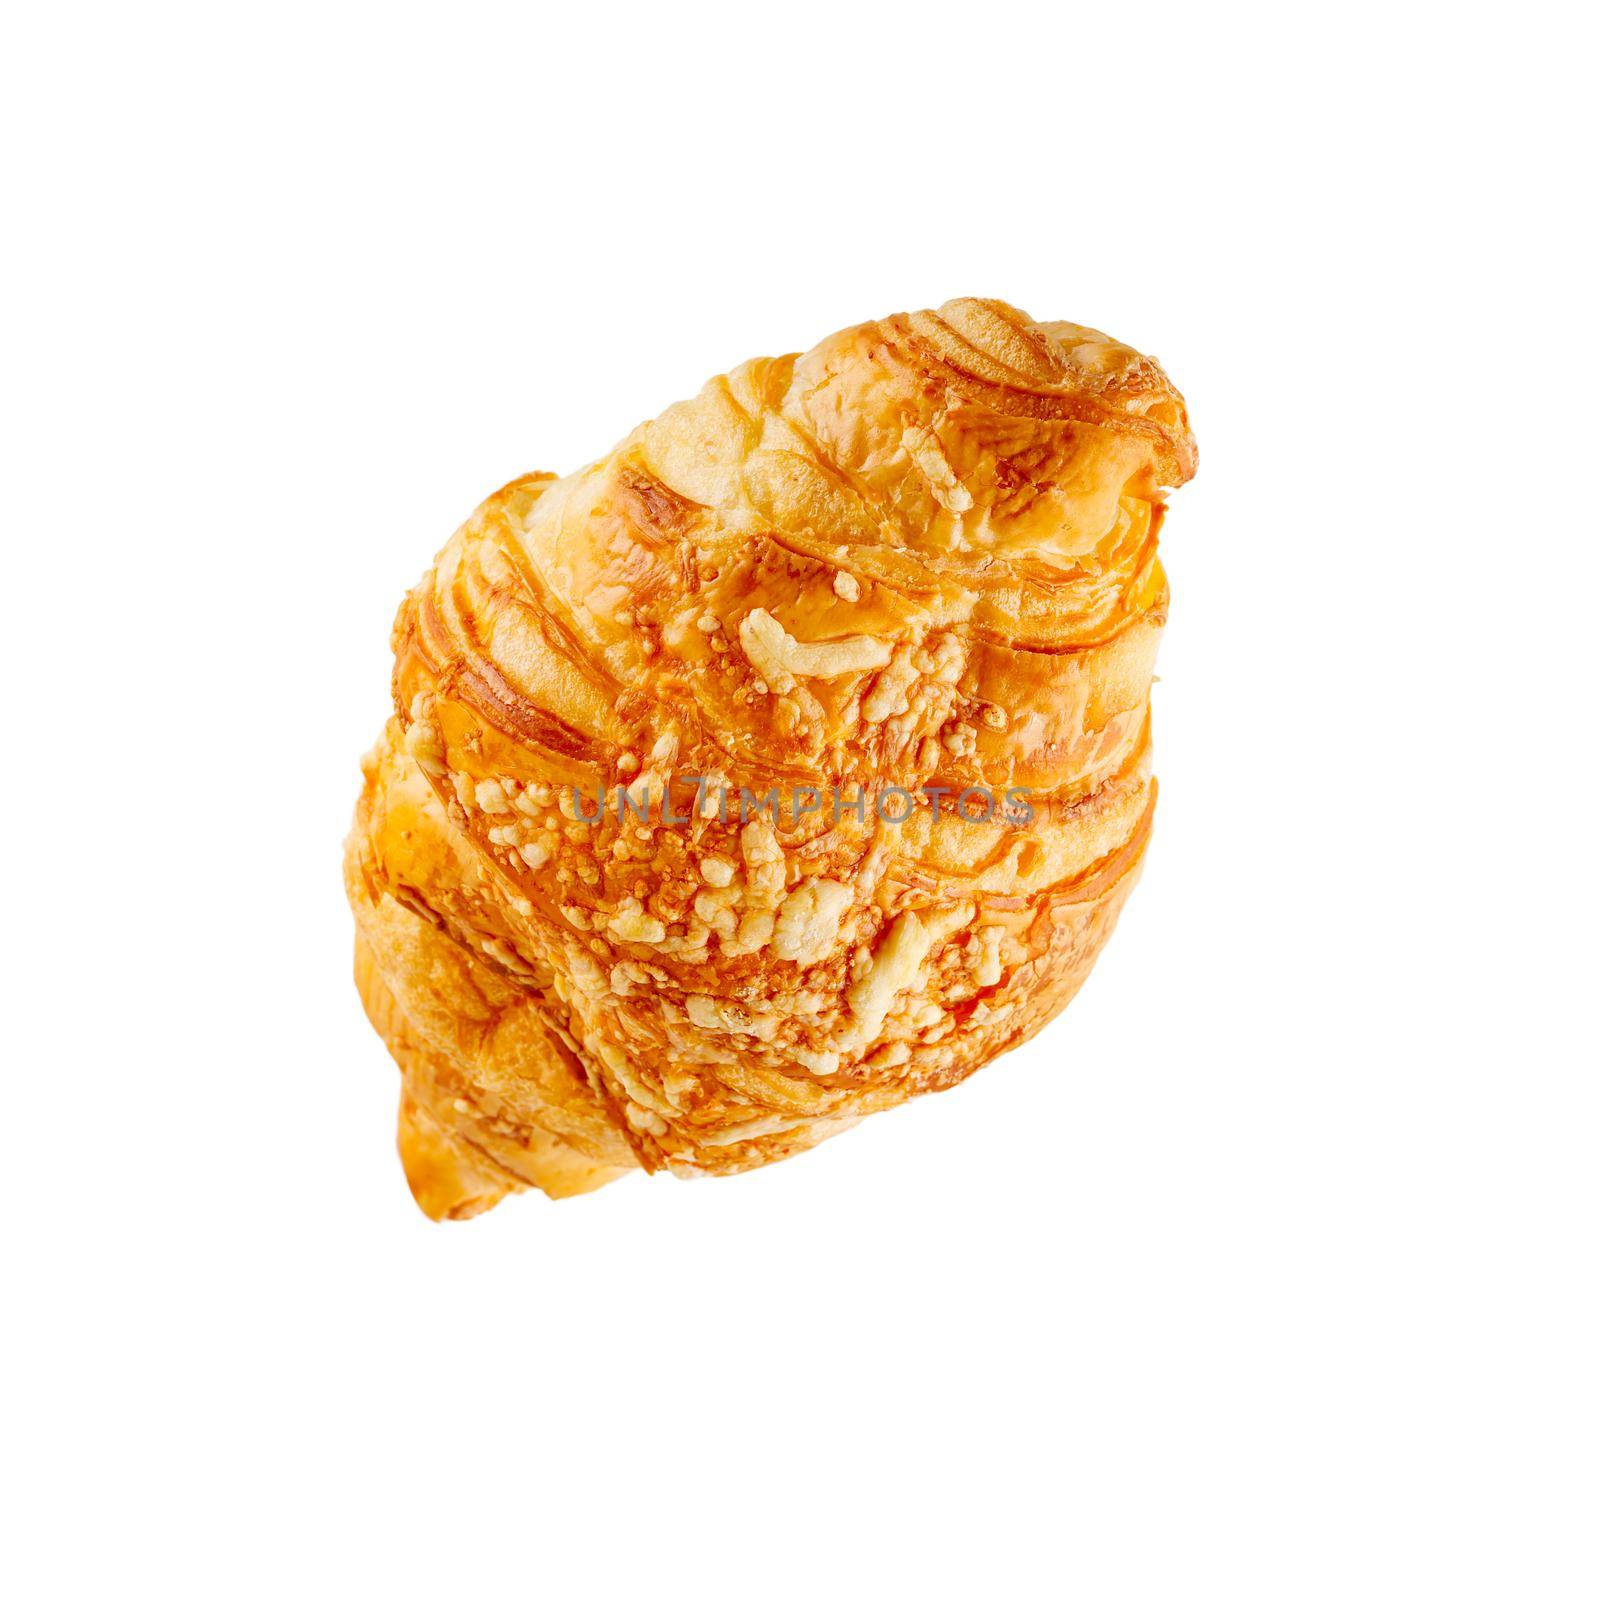 Fresh croissant with cheese isolated on white background by PhotoTime